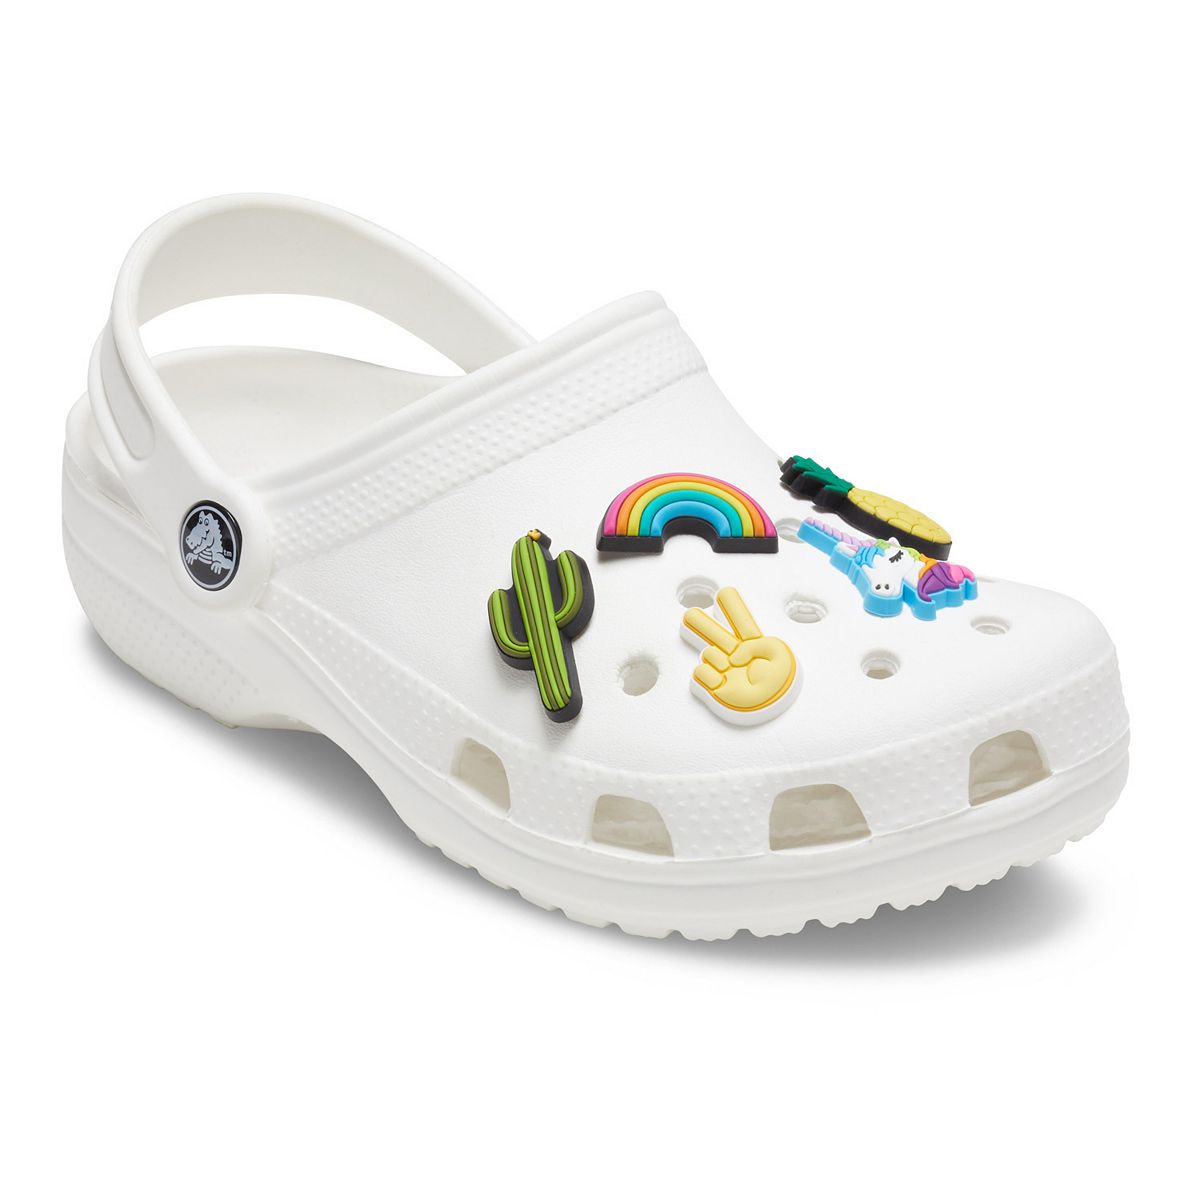 Crocs Jibbitz & Charms: Find Accessories for Your Pair of Crocs Footwear |  Kohl's